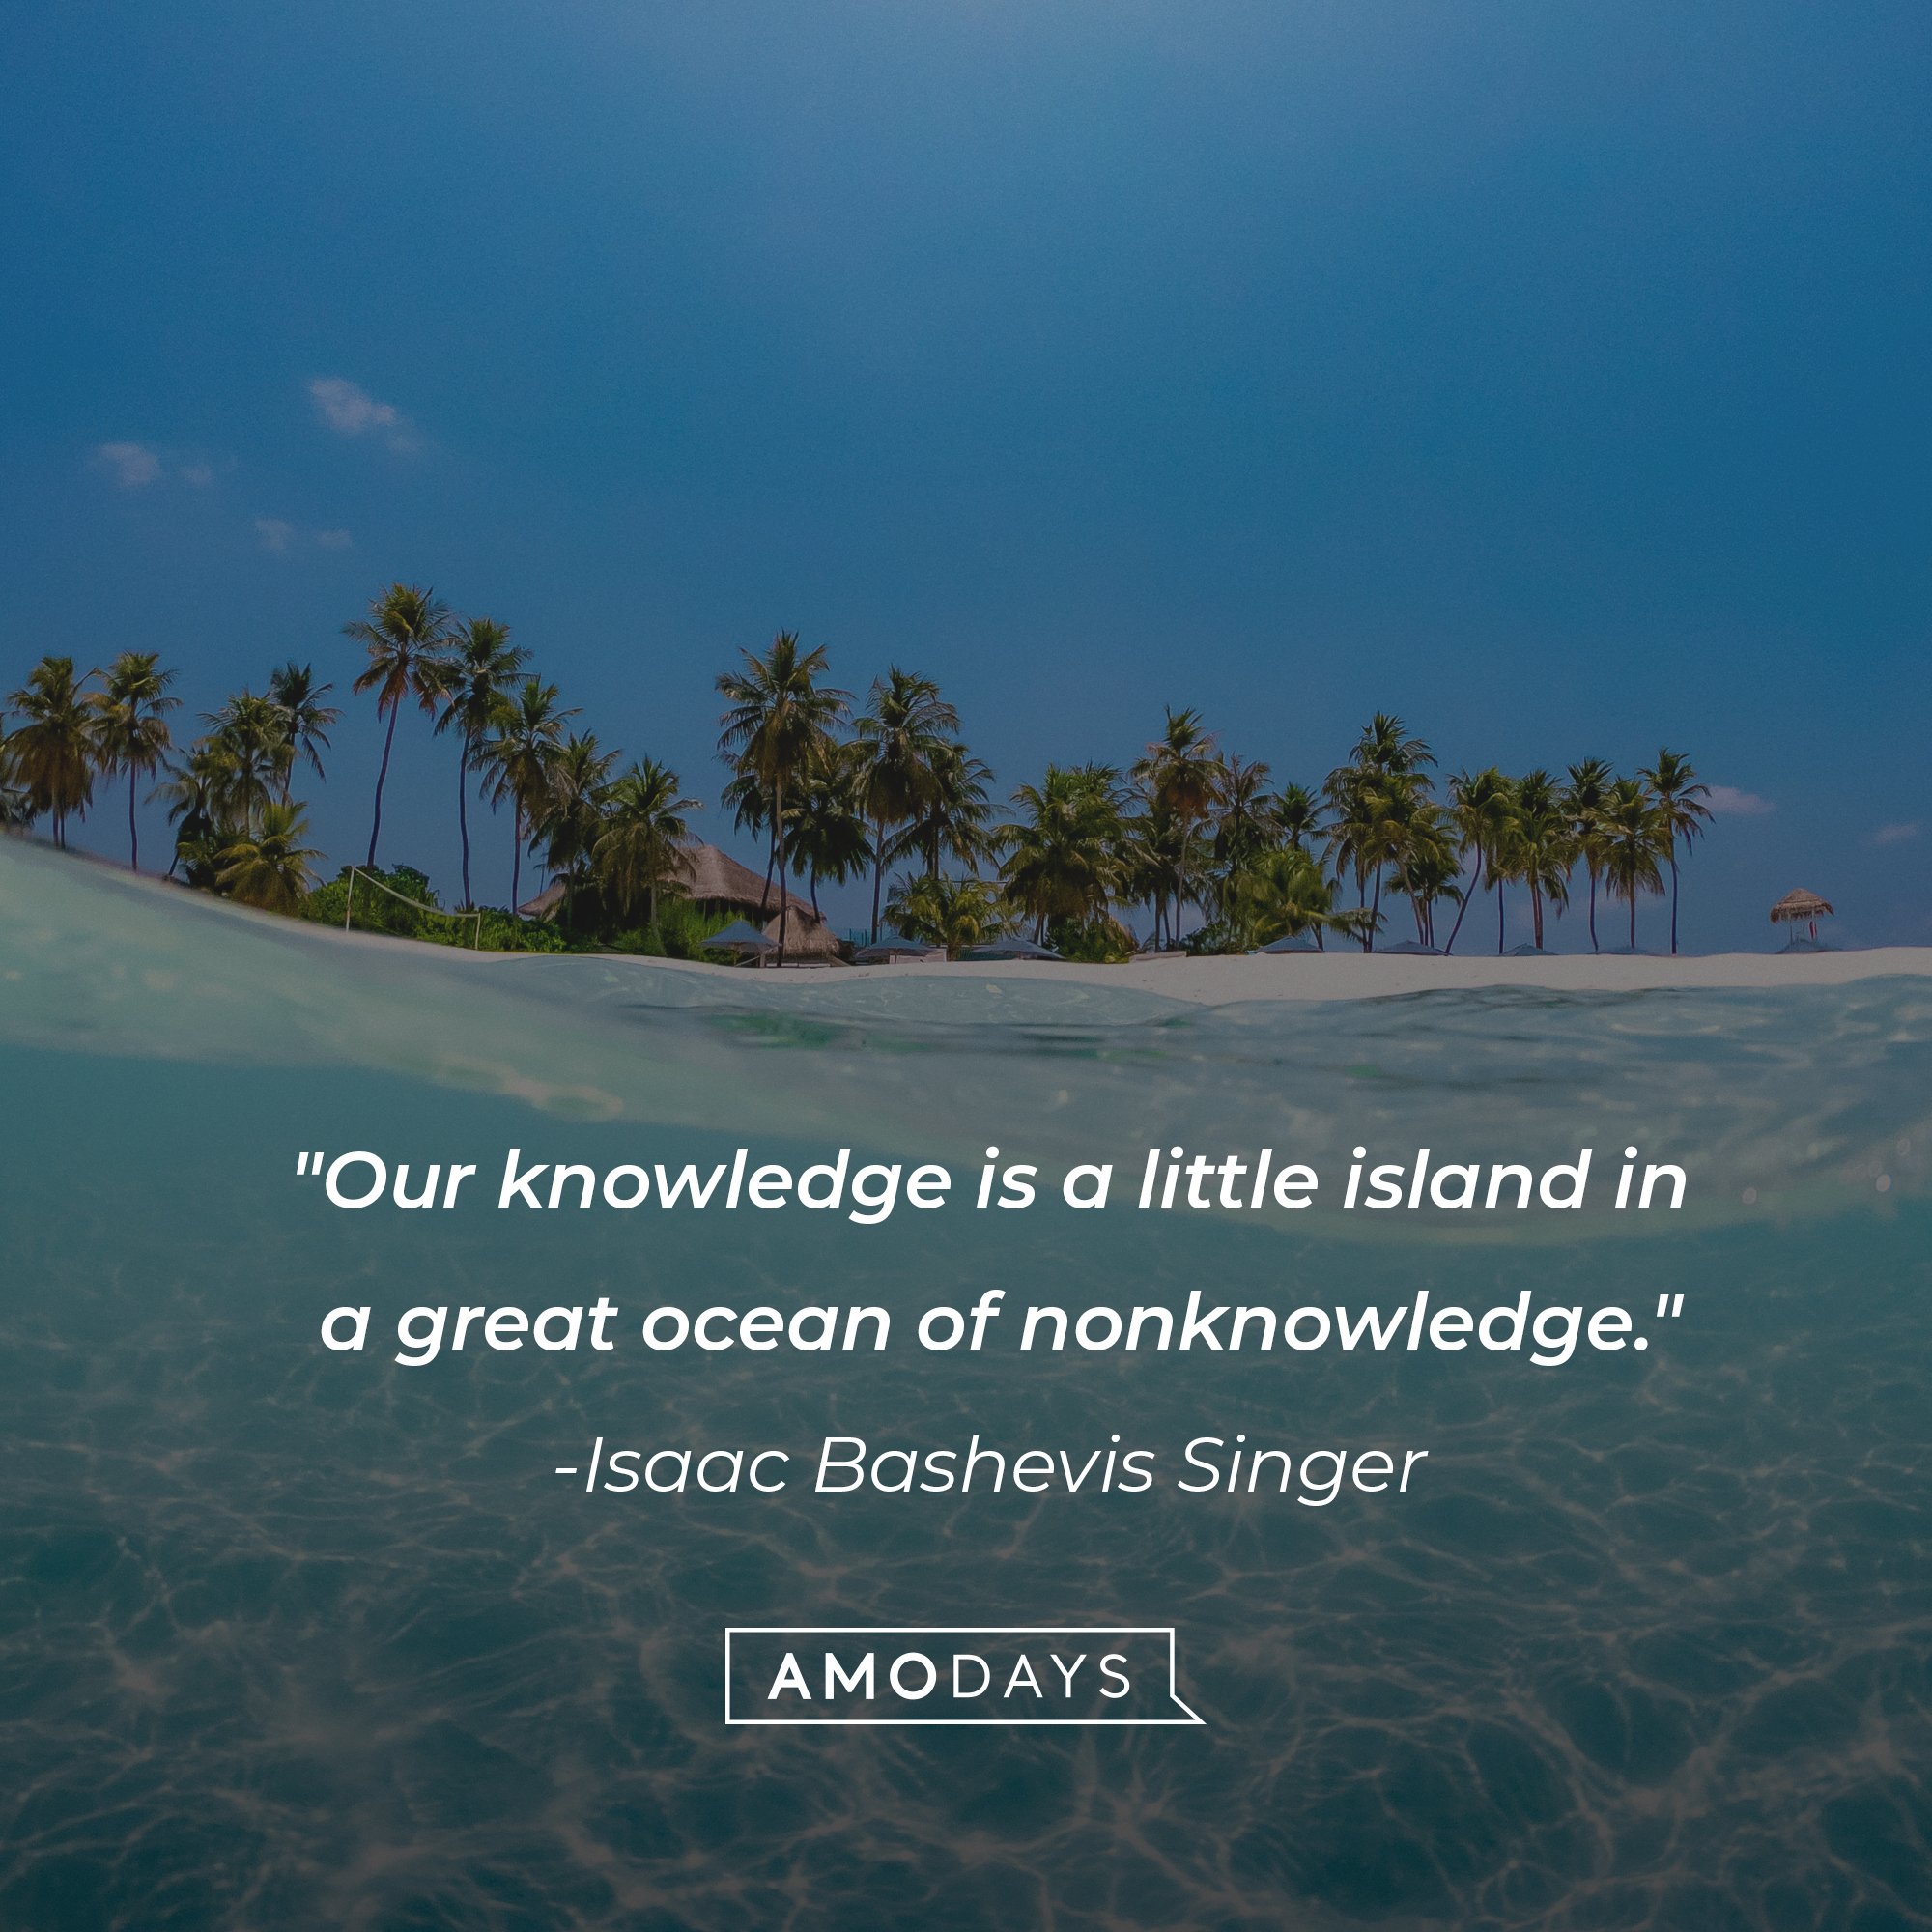 Isaac Bashevis Singer's quote: "Our knowledge is a little island in a great ocean of nonknowledge." | Image: AmoDays